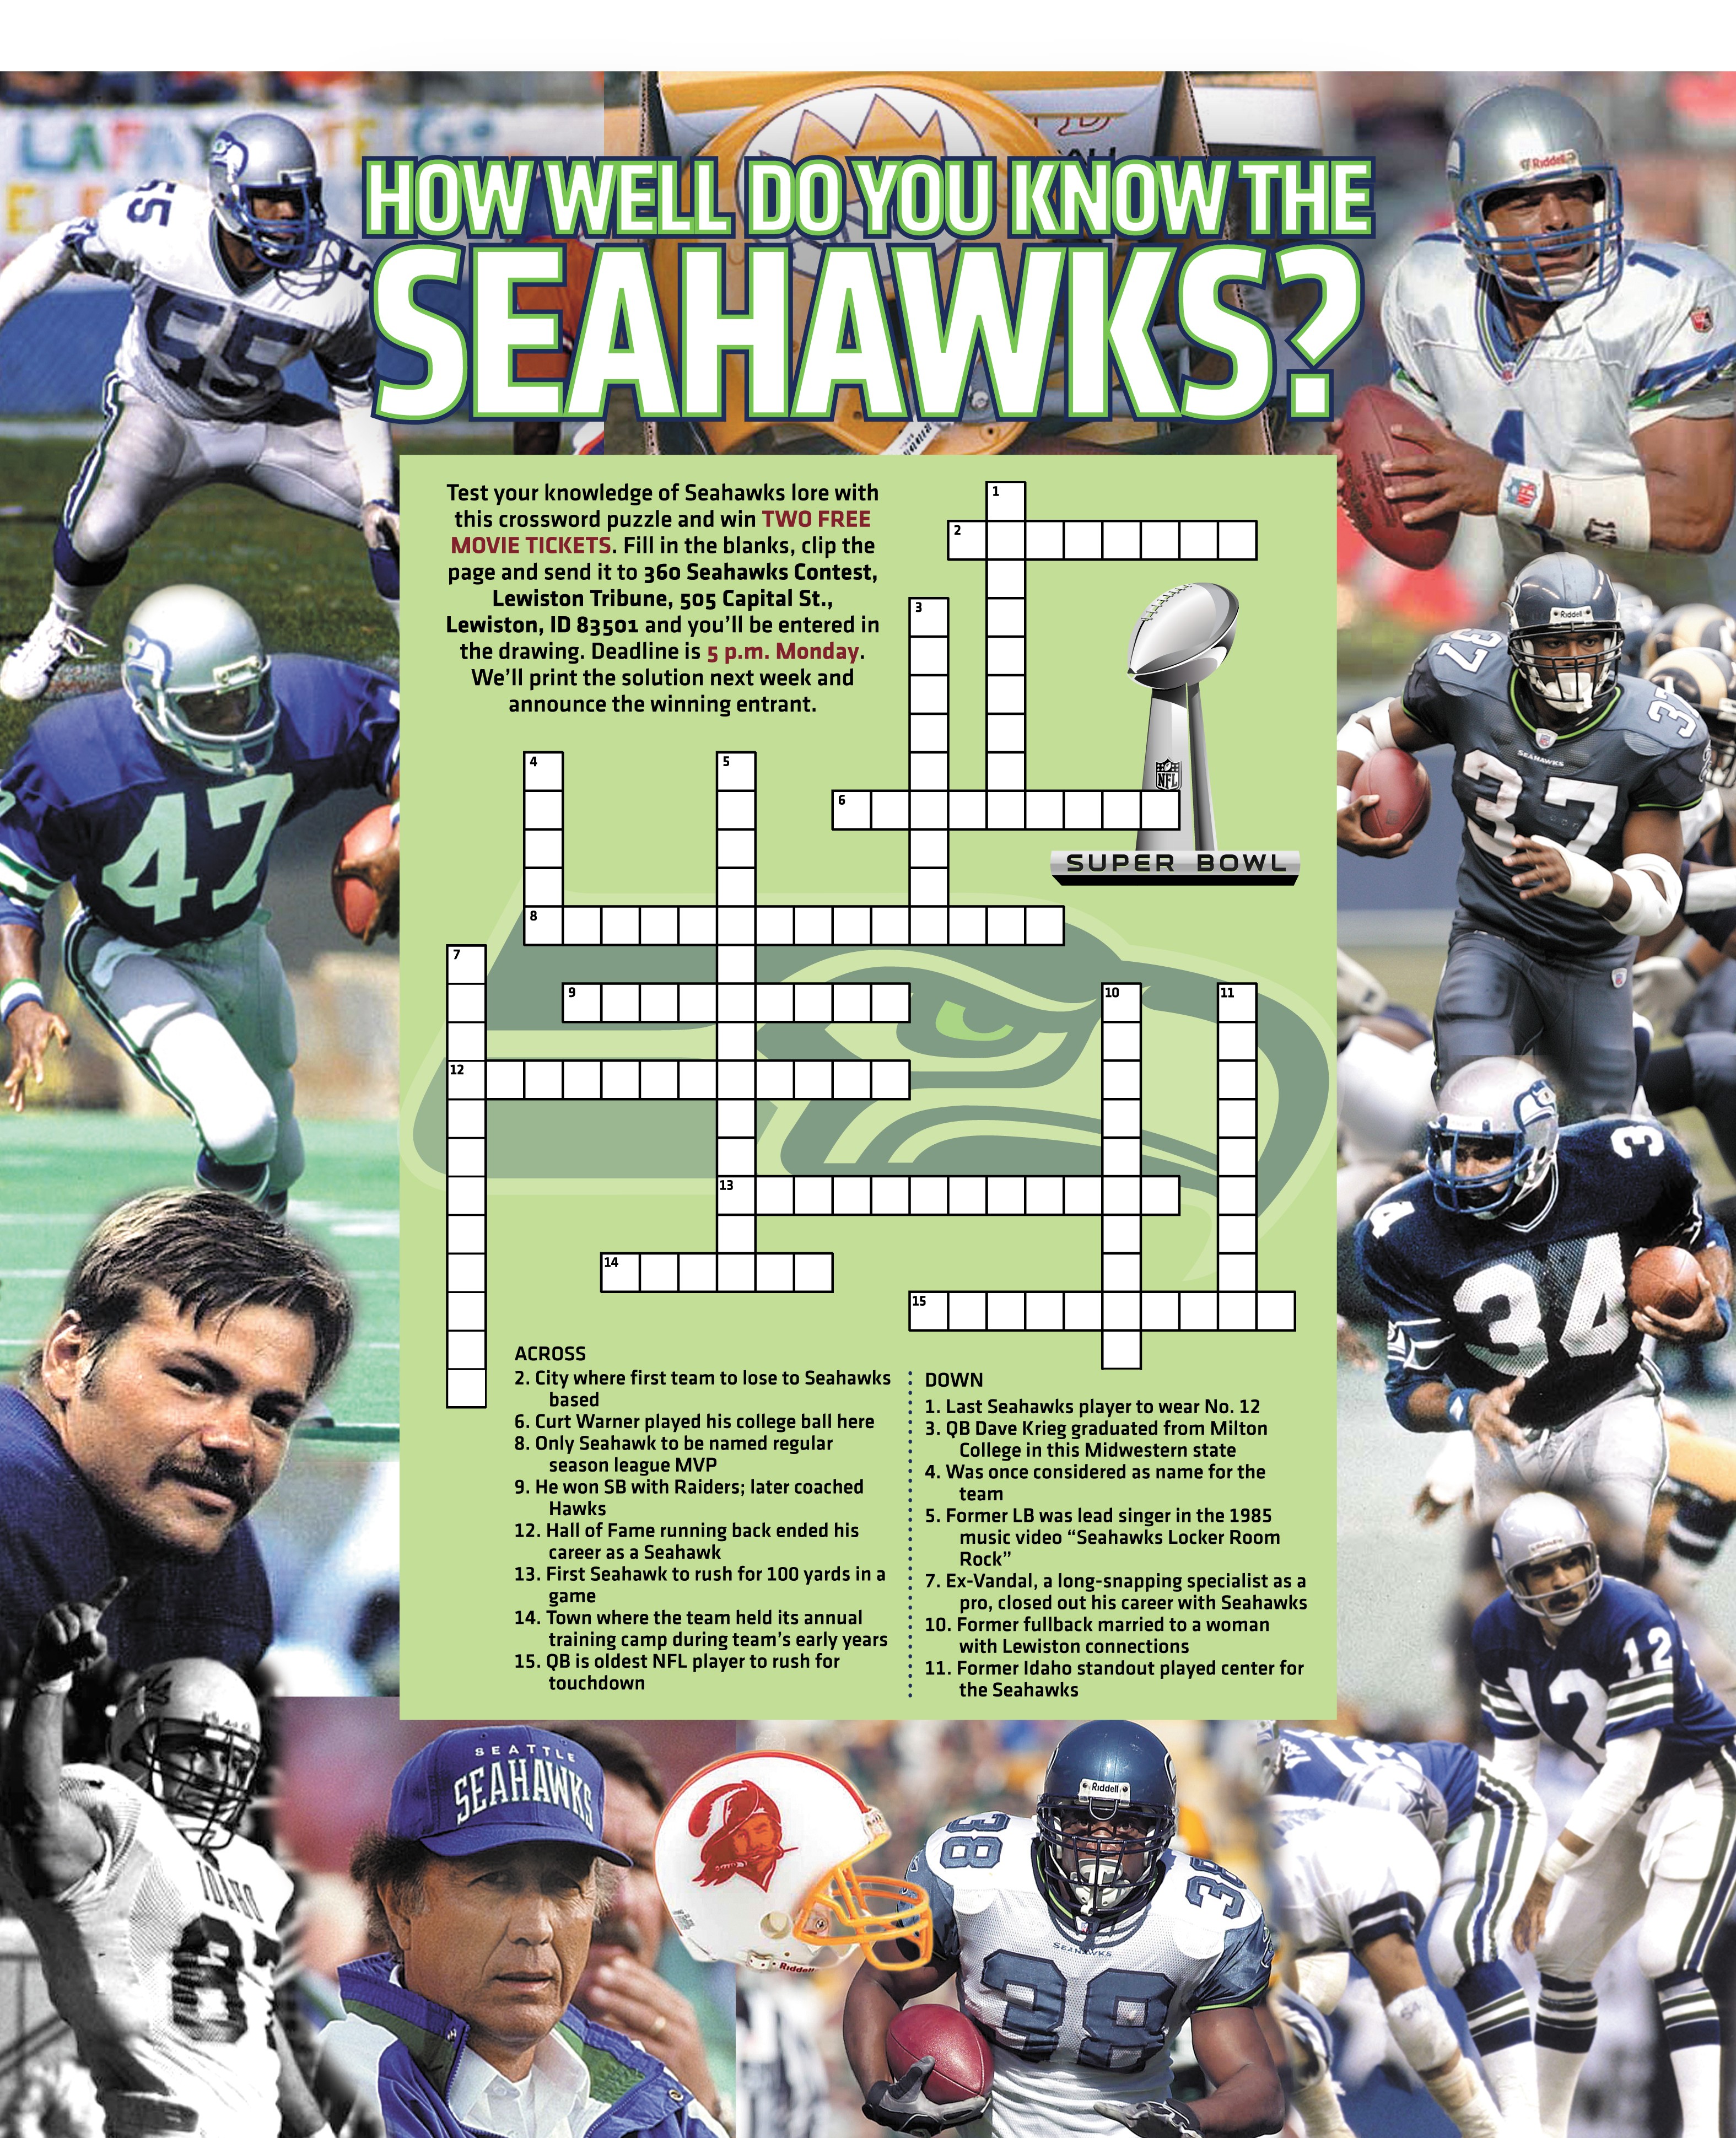 How well do you know the Seahawks?